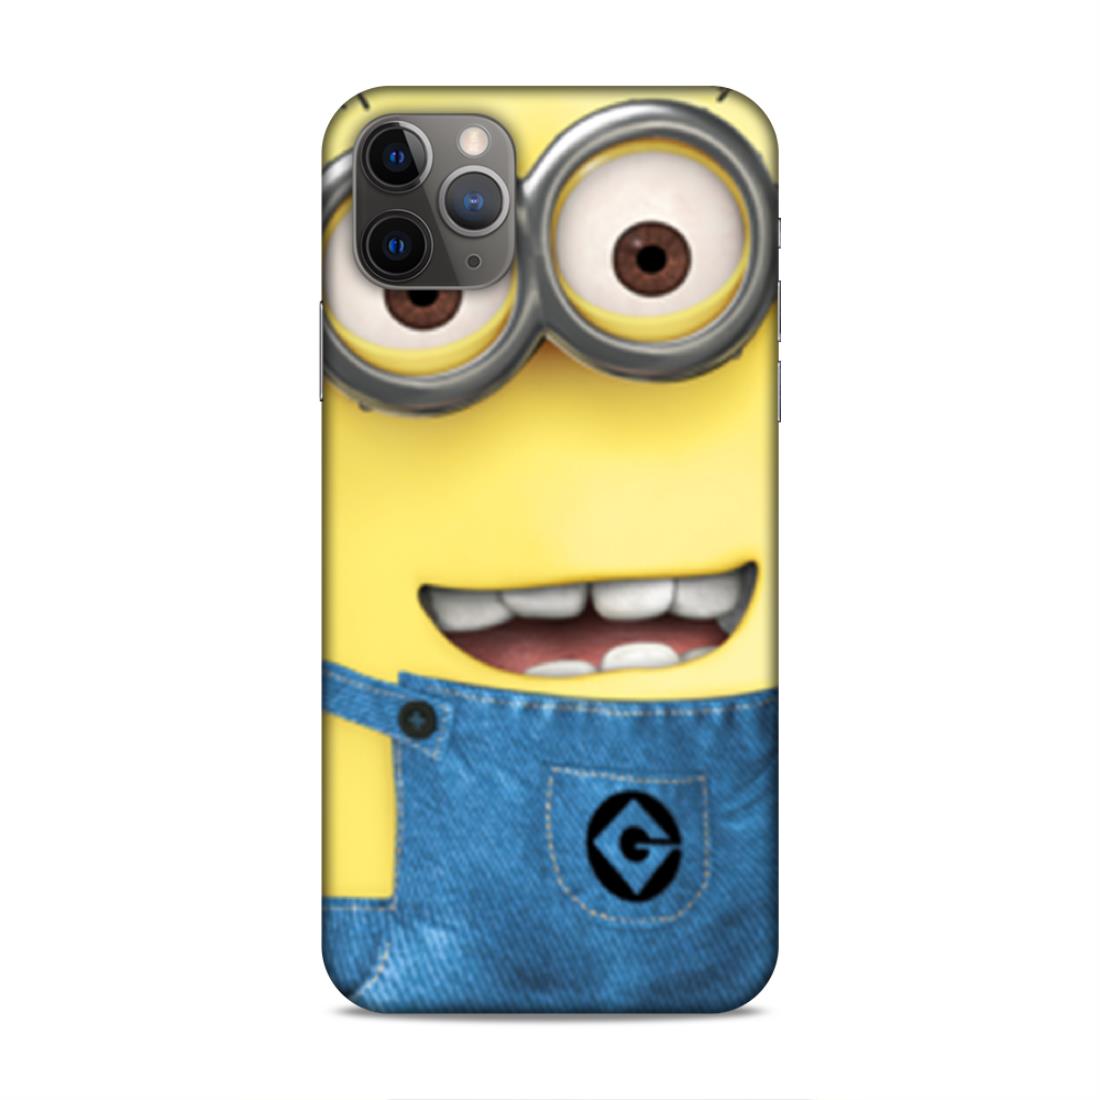 Minions Hard Back Case For Apple iPhone 11 Pro Max